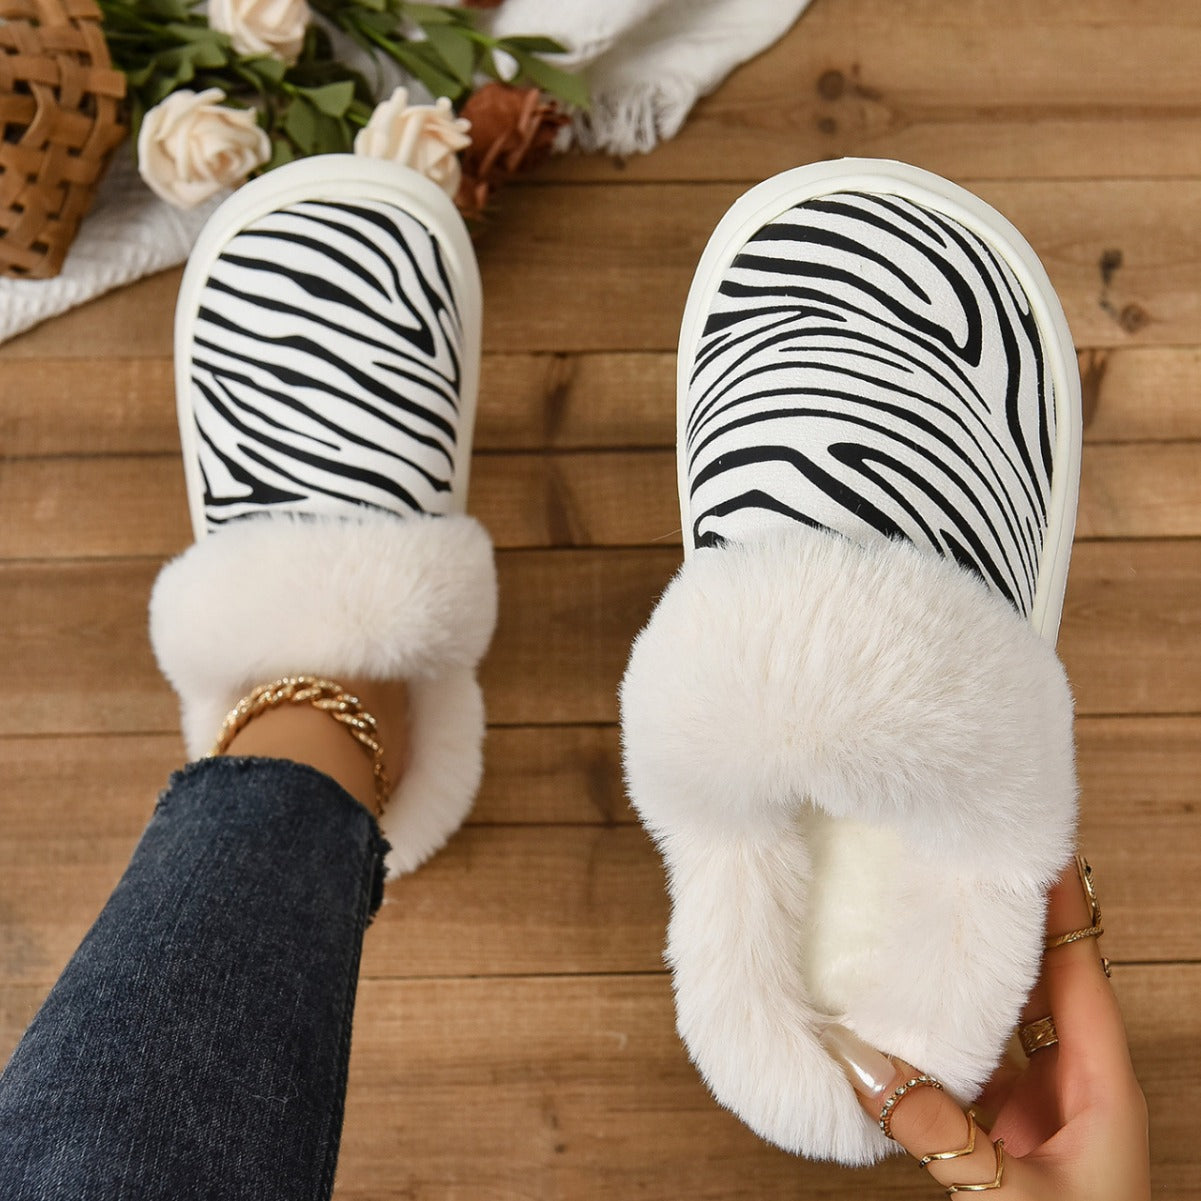 Leopard Print Casual Cotton Slippers